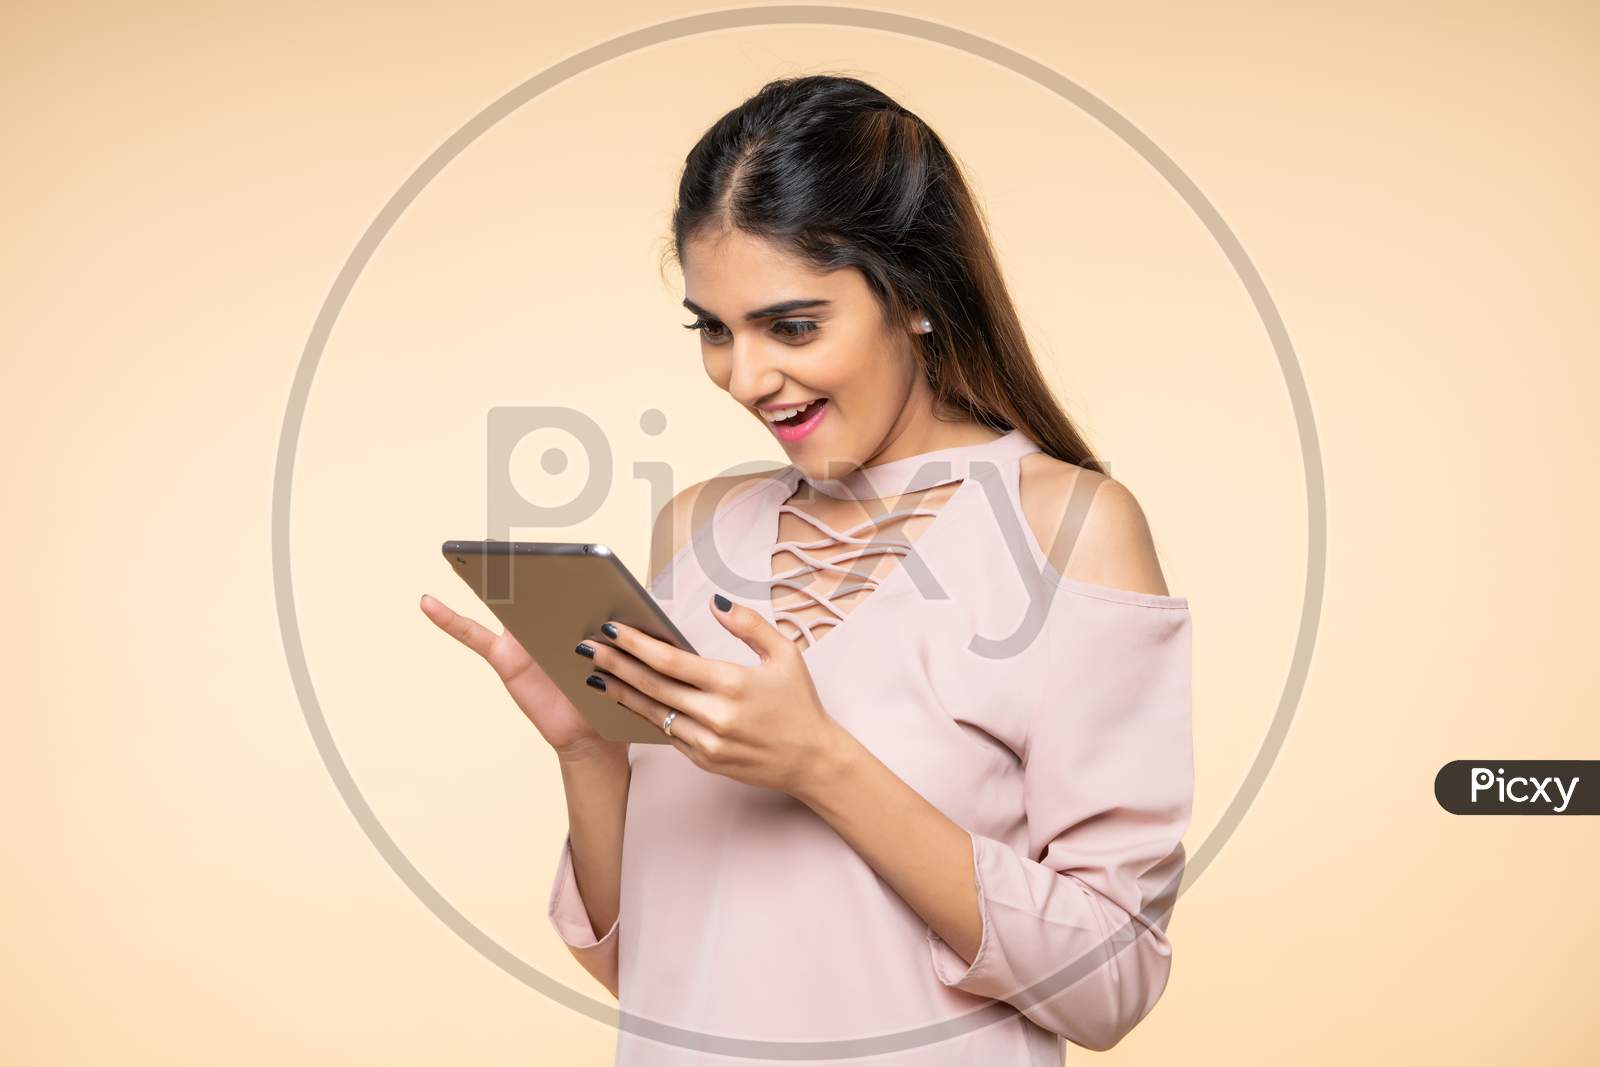 Indian excited young woman smiling while using Mobile Tab